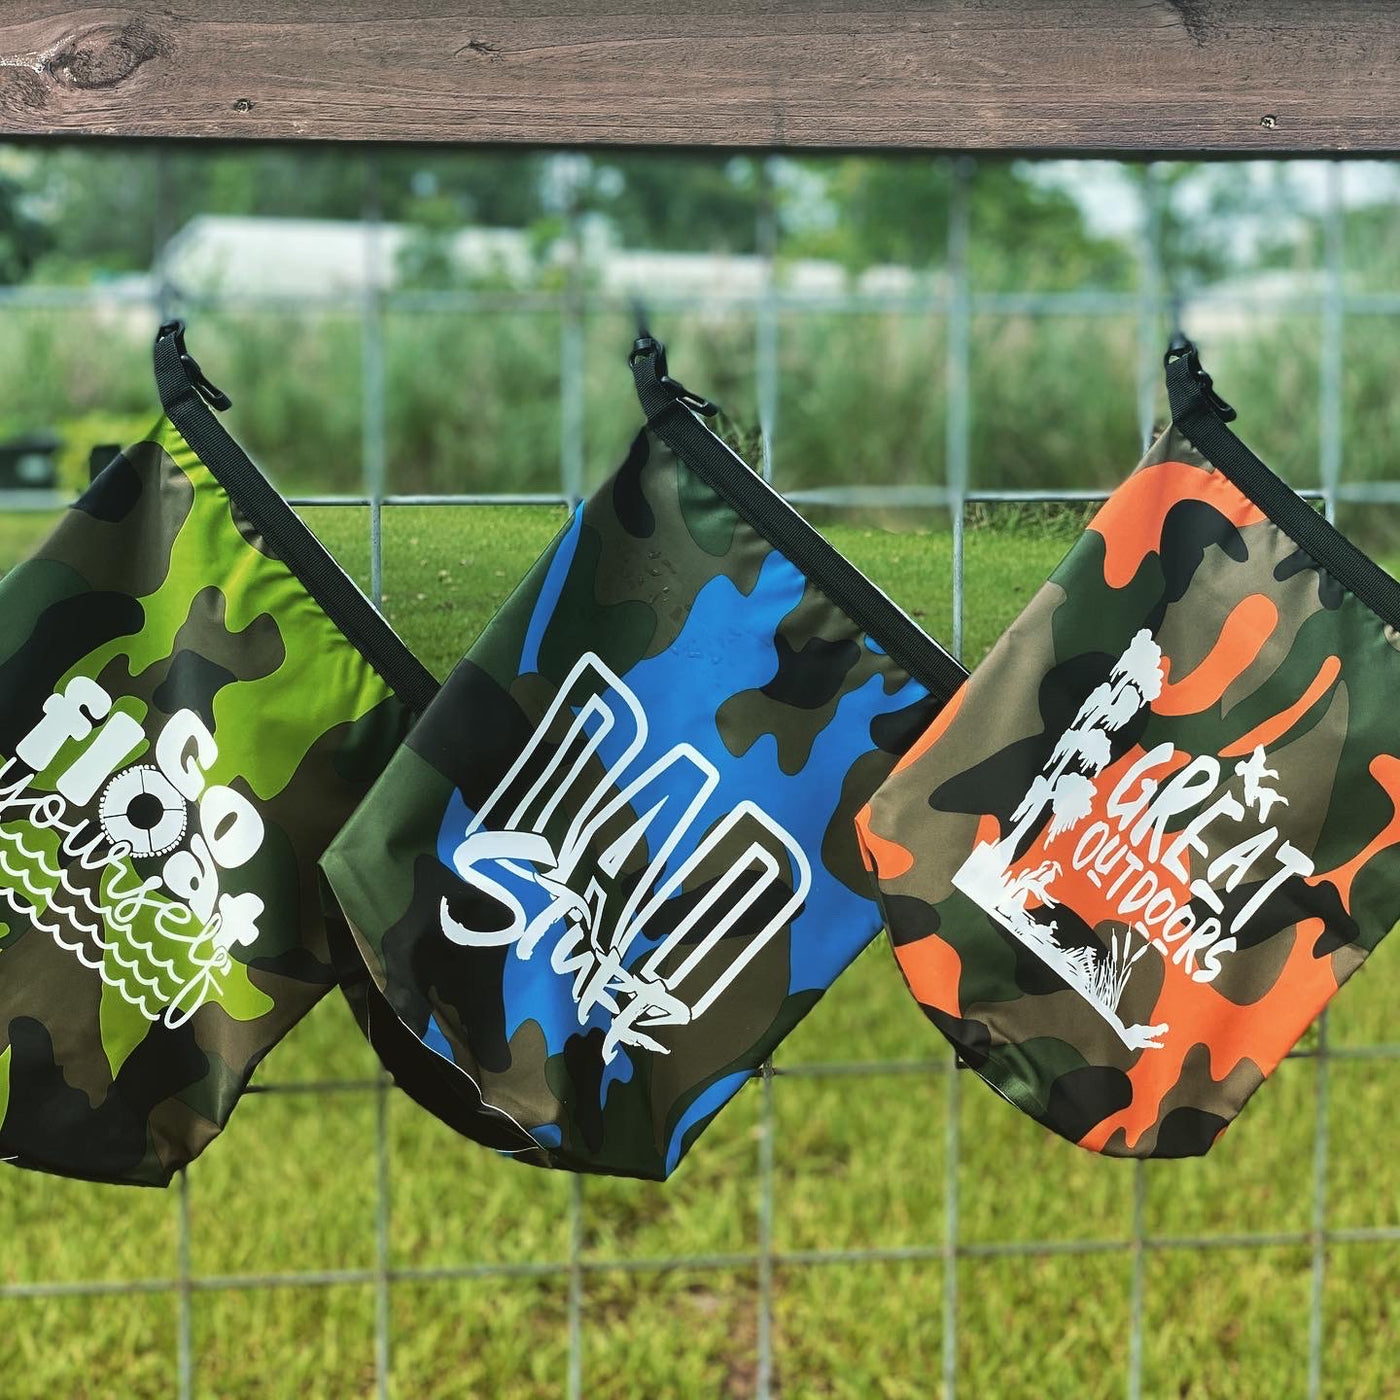 Three camo dry bags hanging on a fence. From left to right there is a green camo bag that says " Go Float Yourself" The O in float is a floatie and there are waves, In the middle is a blue camo dry bag that says dad stuff, and on the far right is an orange camo bag that says great outdoors and has ducks trees and reeds